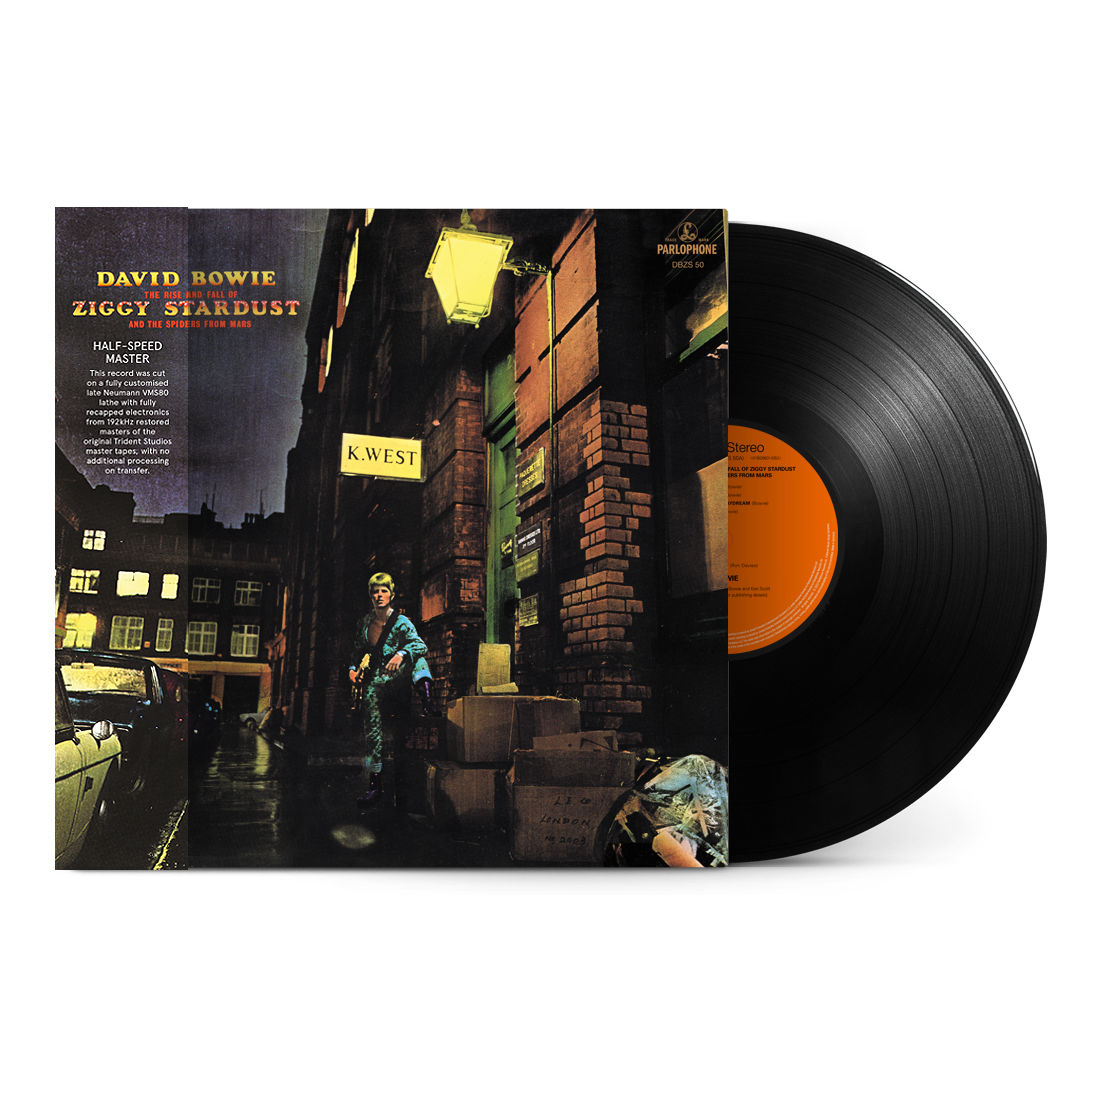 David Bowie - The Rise and Fall of Ziggy Stardust and the Spiders from Mars: 50th Anniversary Half Speed Master Vinyl LP